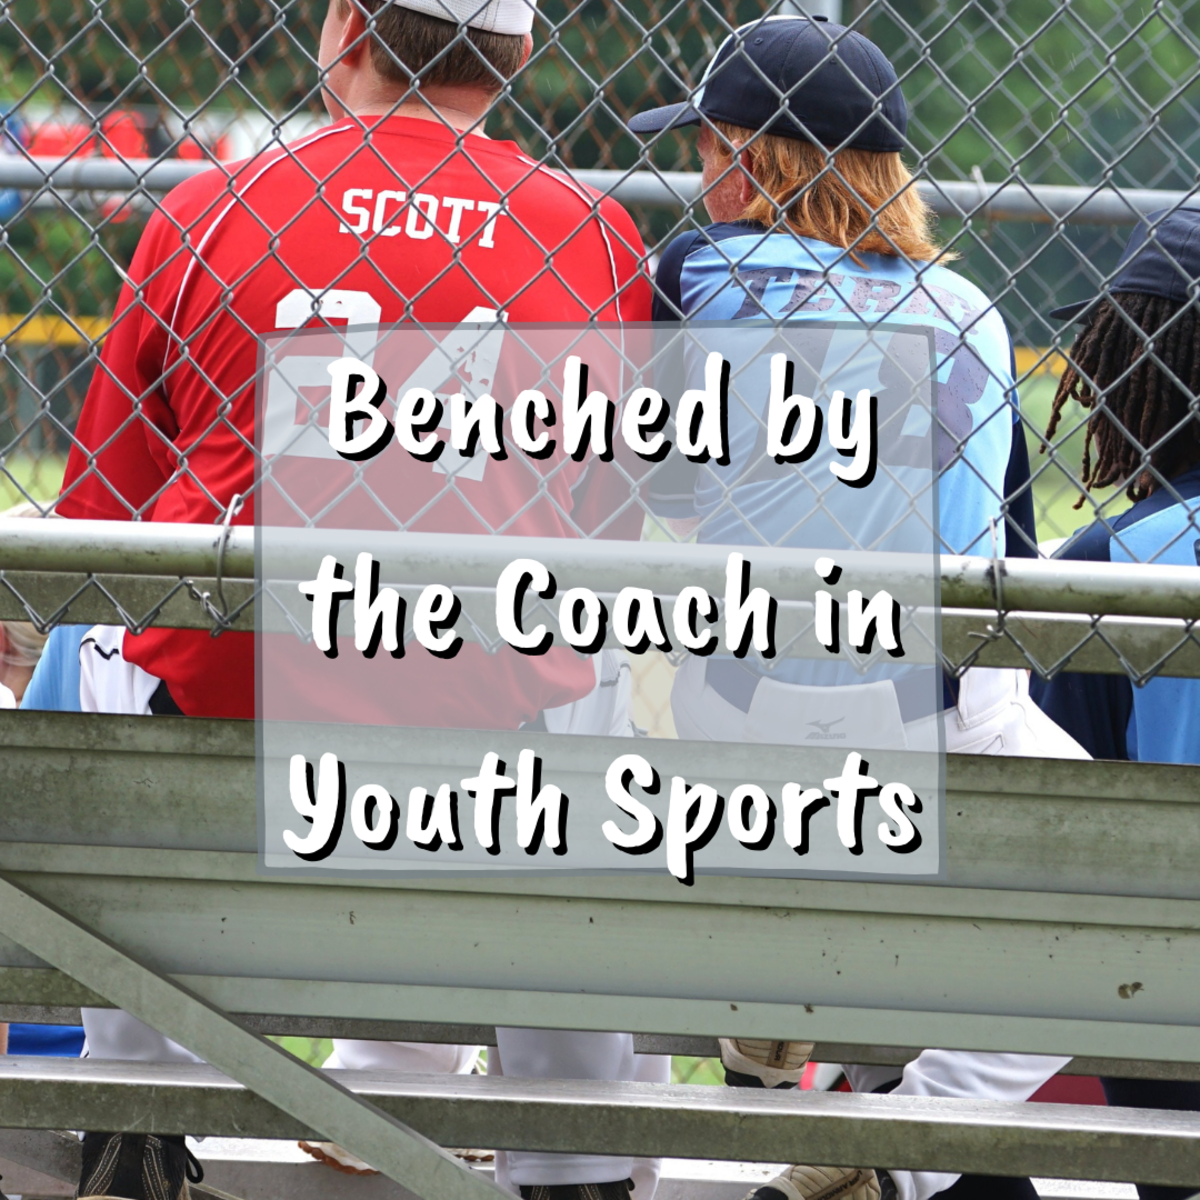 Read on for an examination of benching practices in youth sports. Do poorer performing kids deserve to be benched? What does this do to developing psyches?